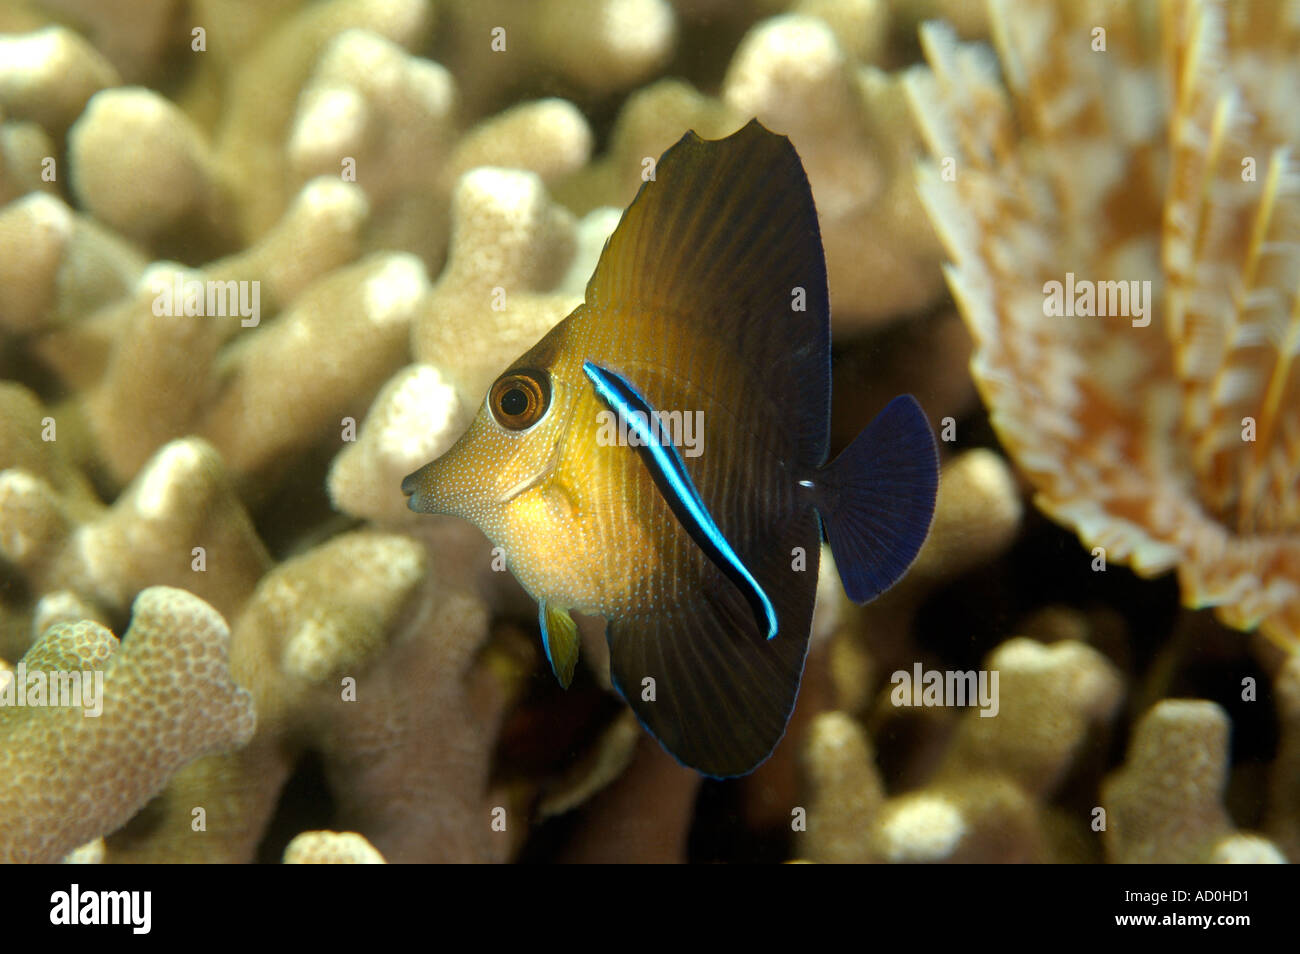 Juvenile brushtail tangfish Zebrasoma scopas being cleaned by cleaner wrasse Kosrae Micronesia Stock Photo